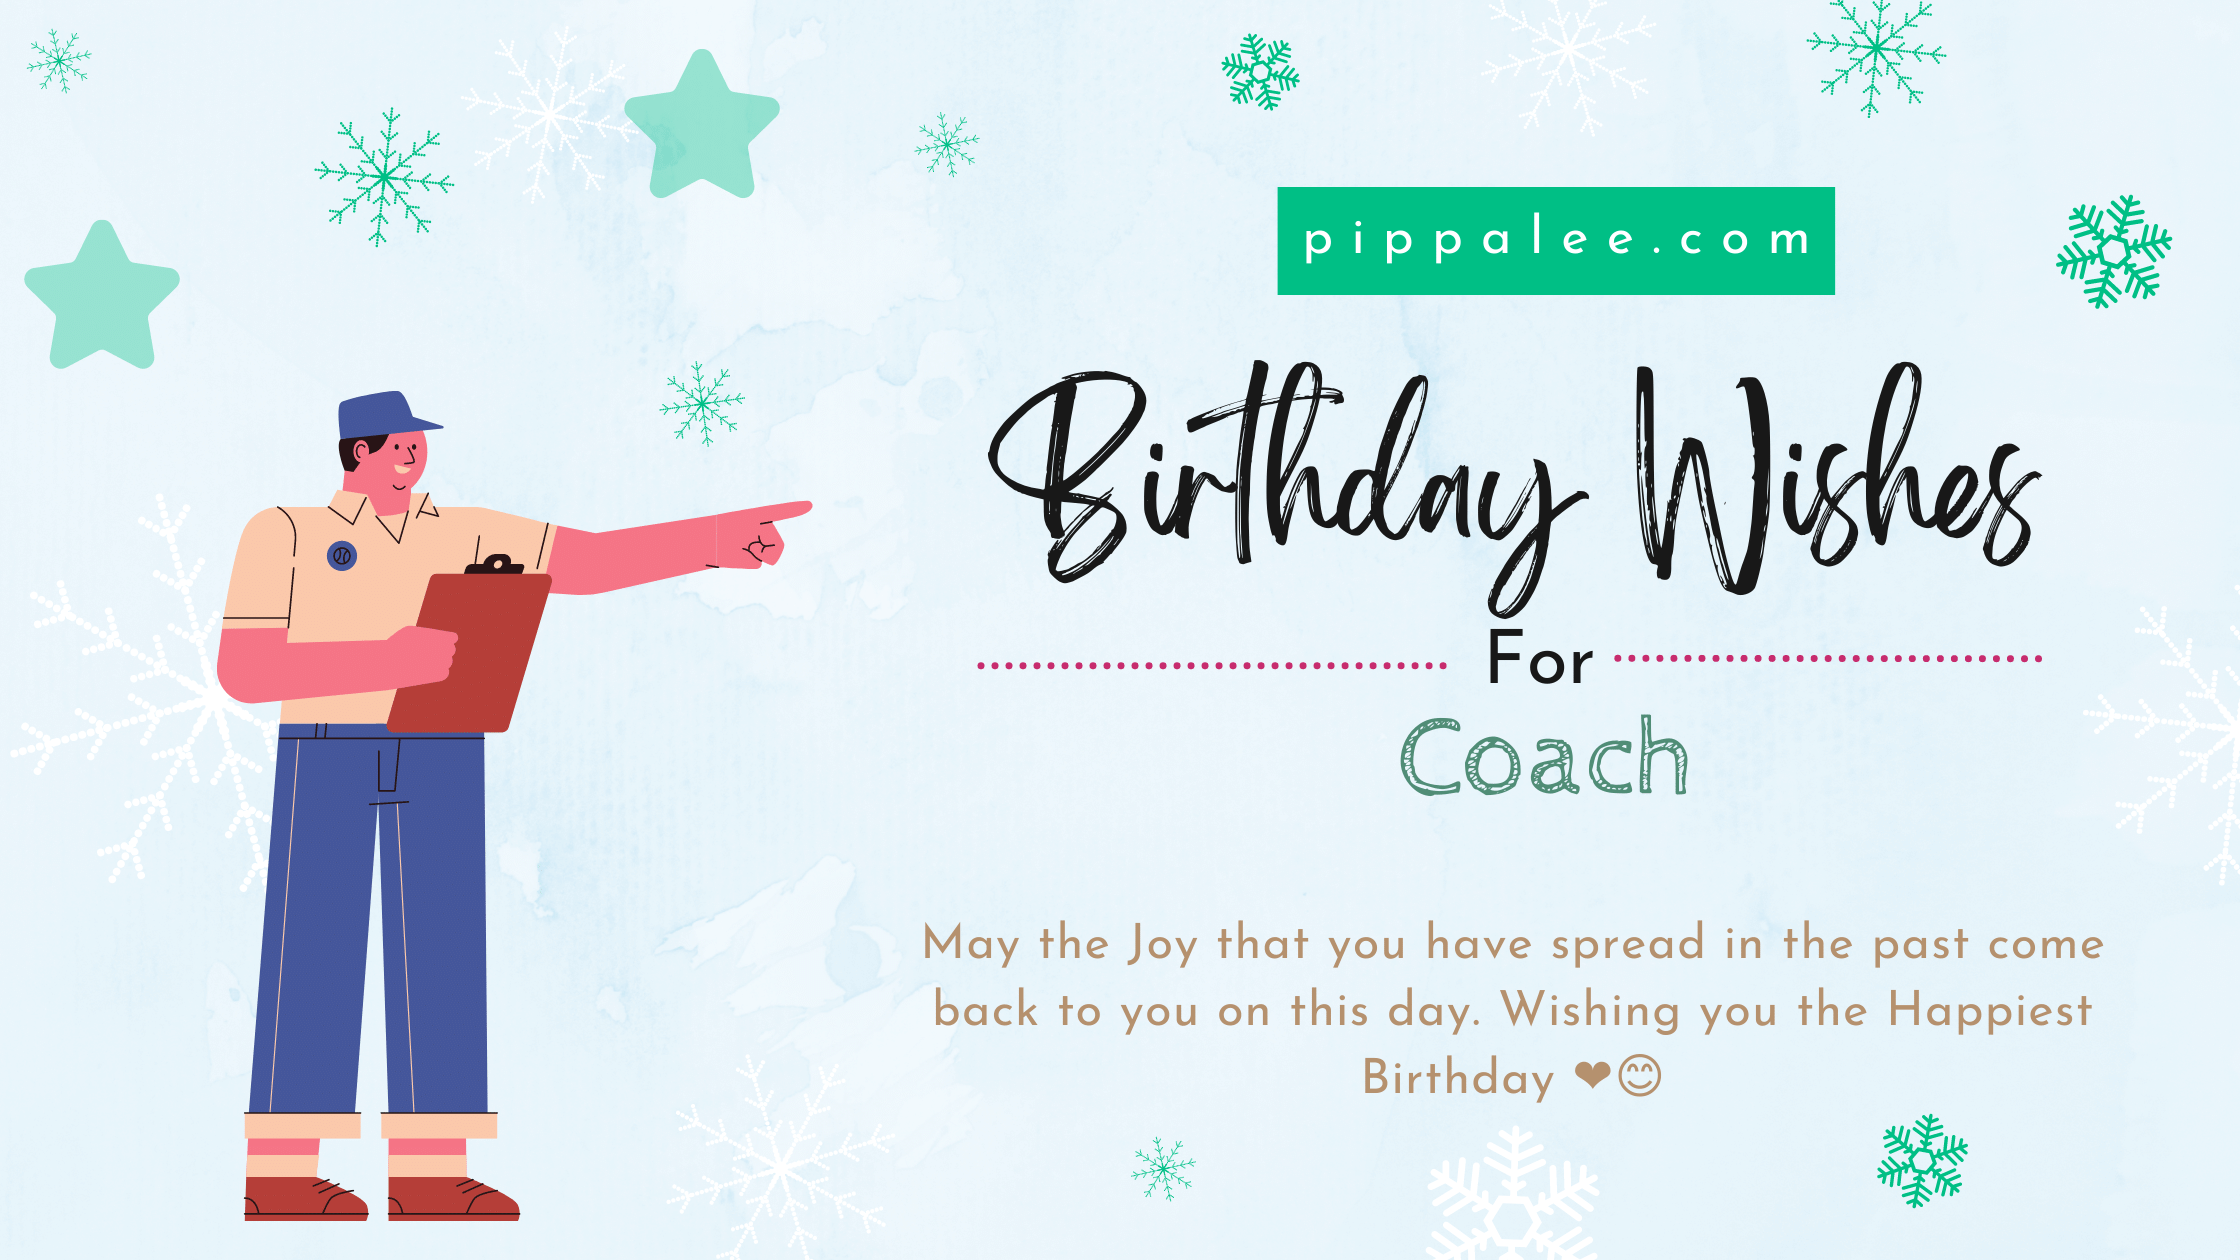 Birthday Wishes For Coach - Wishes & Messages